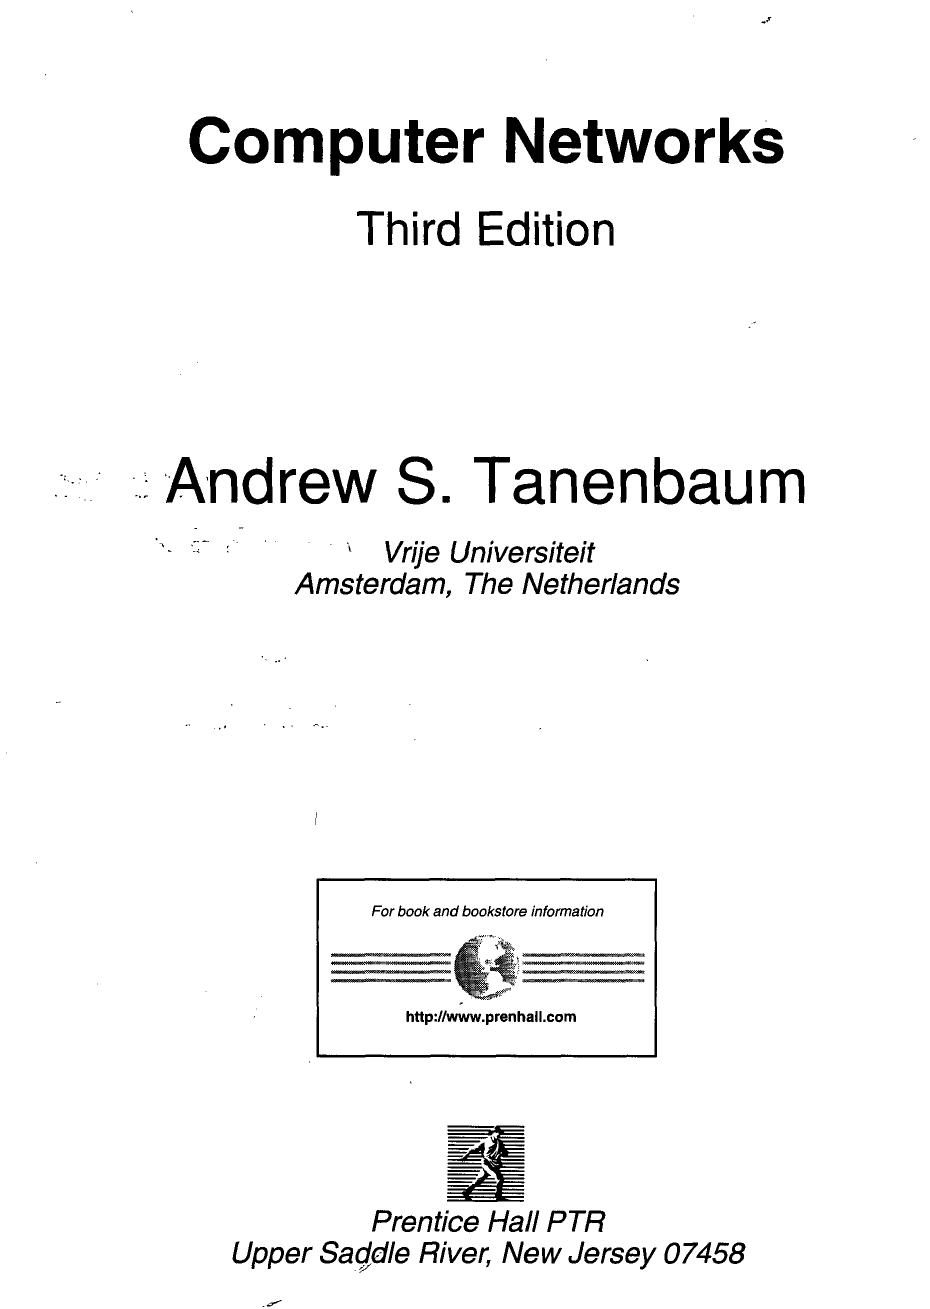 computer networks by andrew s.tanenbaum ebook